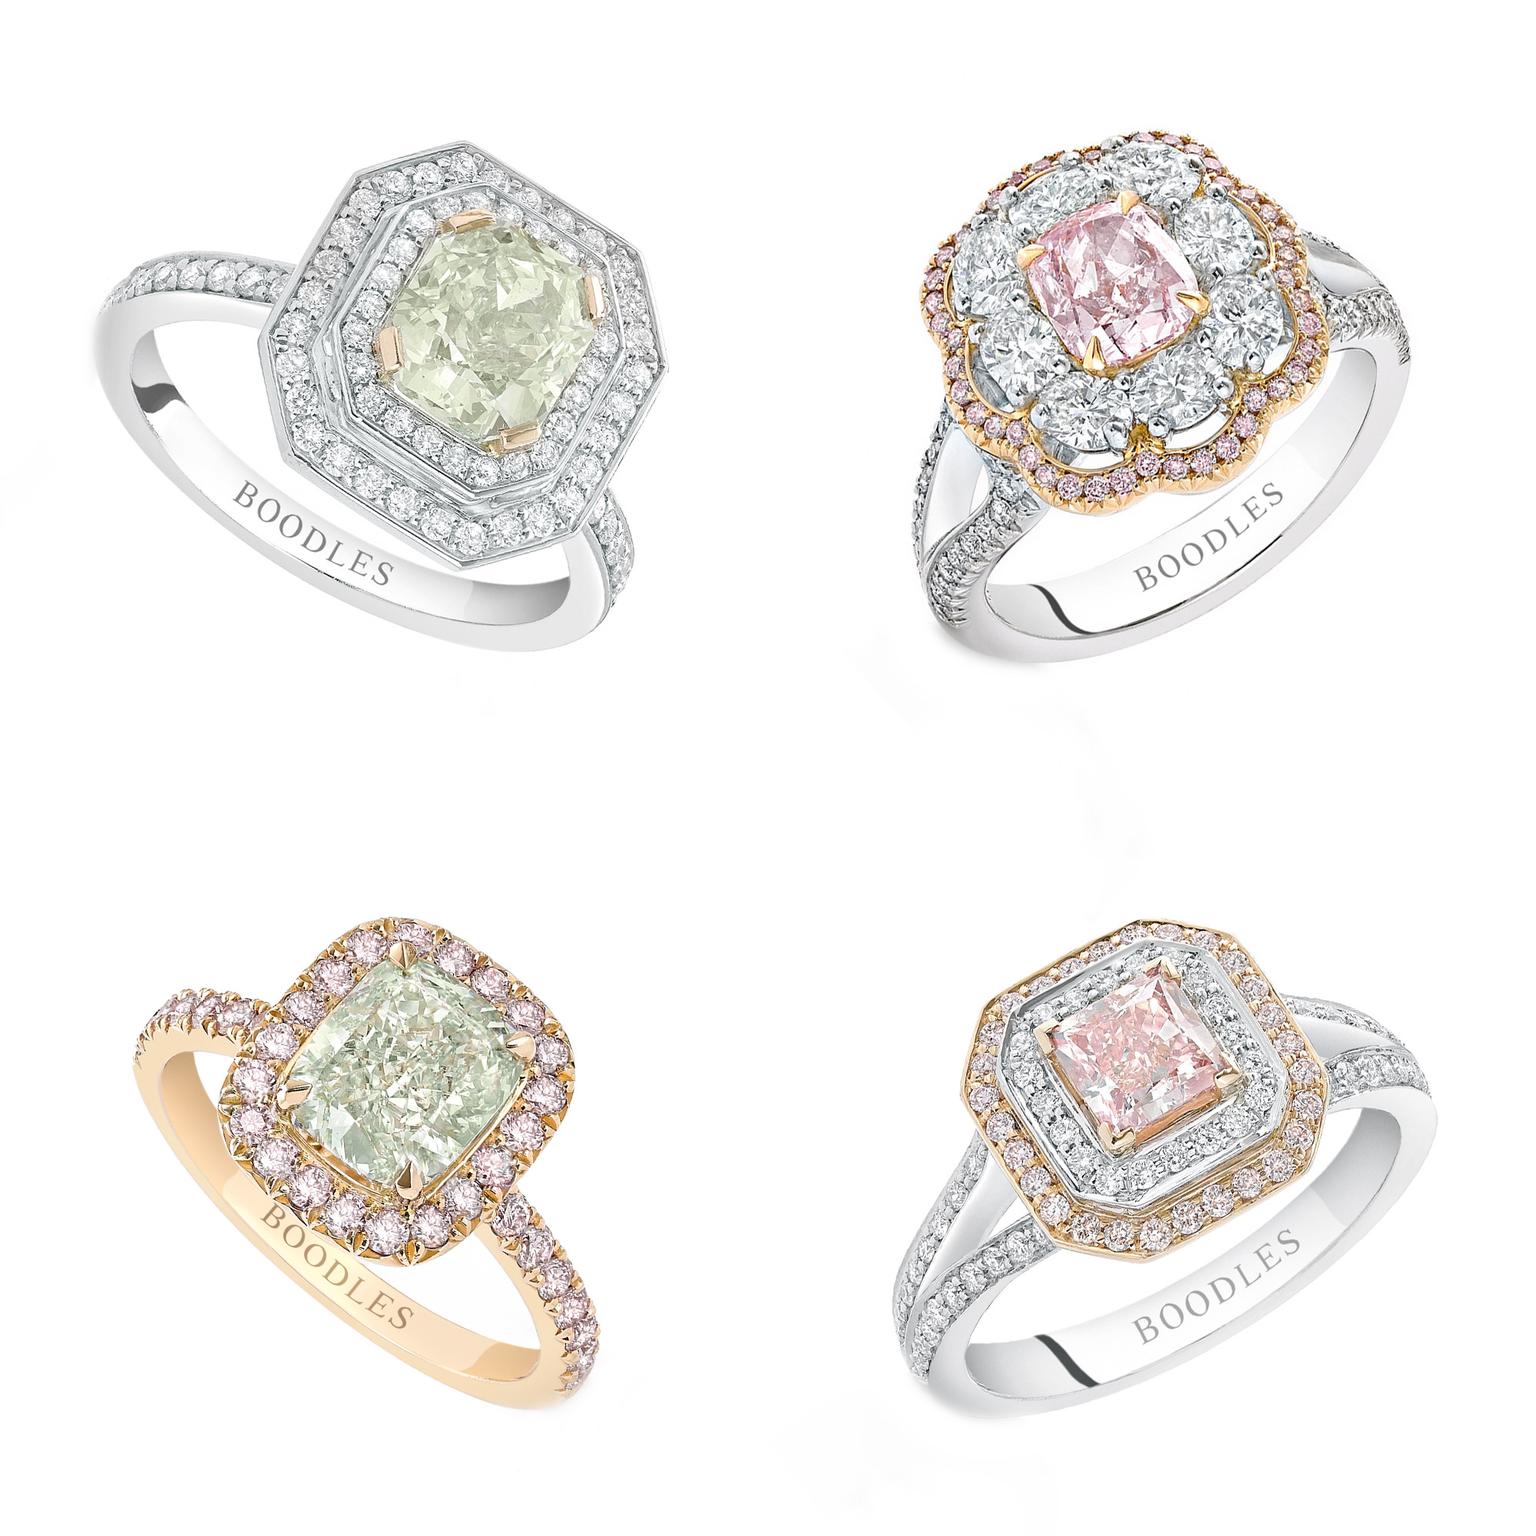 Collage of Boodles coloured diamond rings